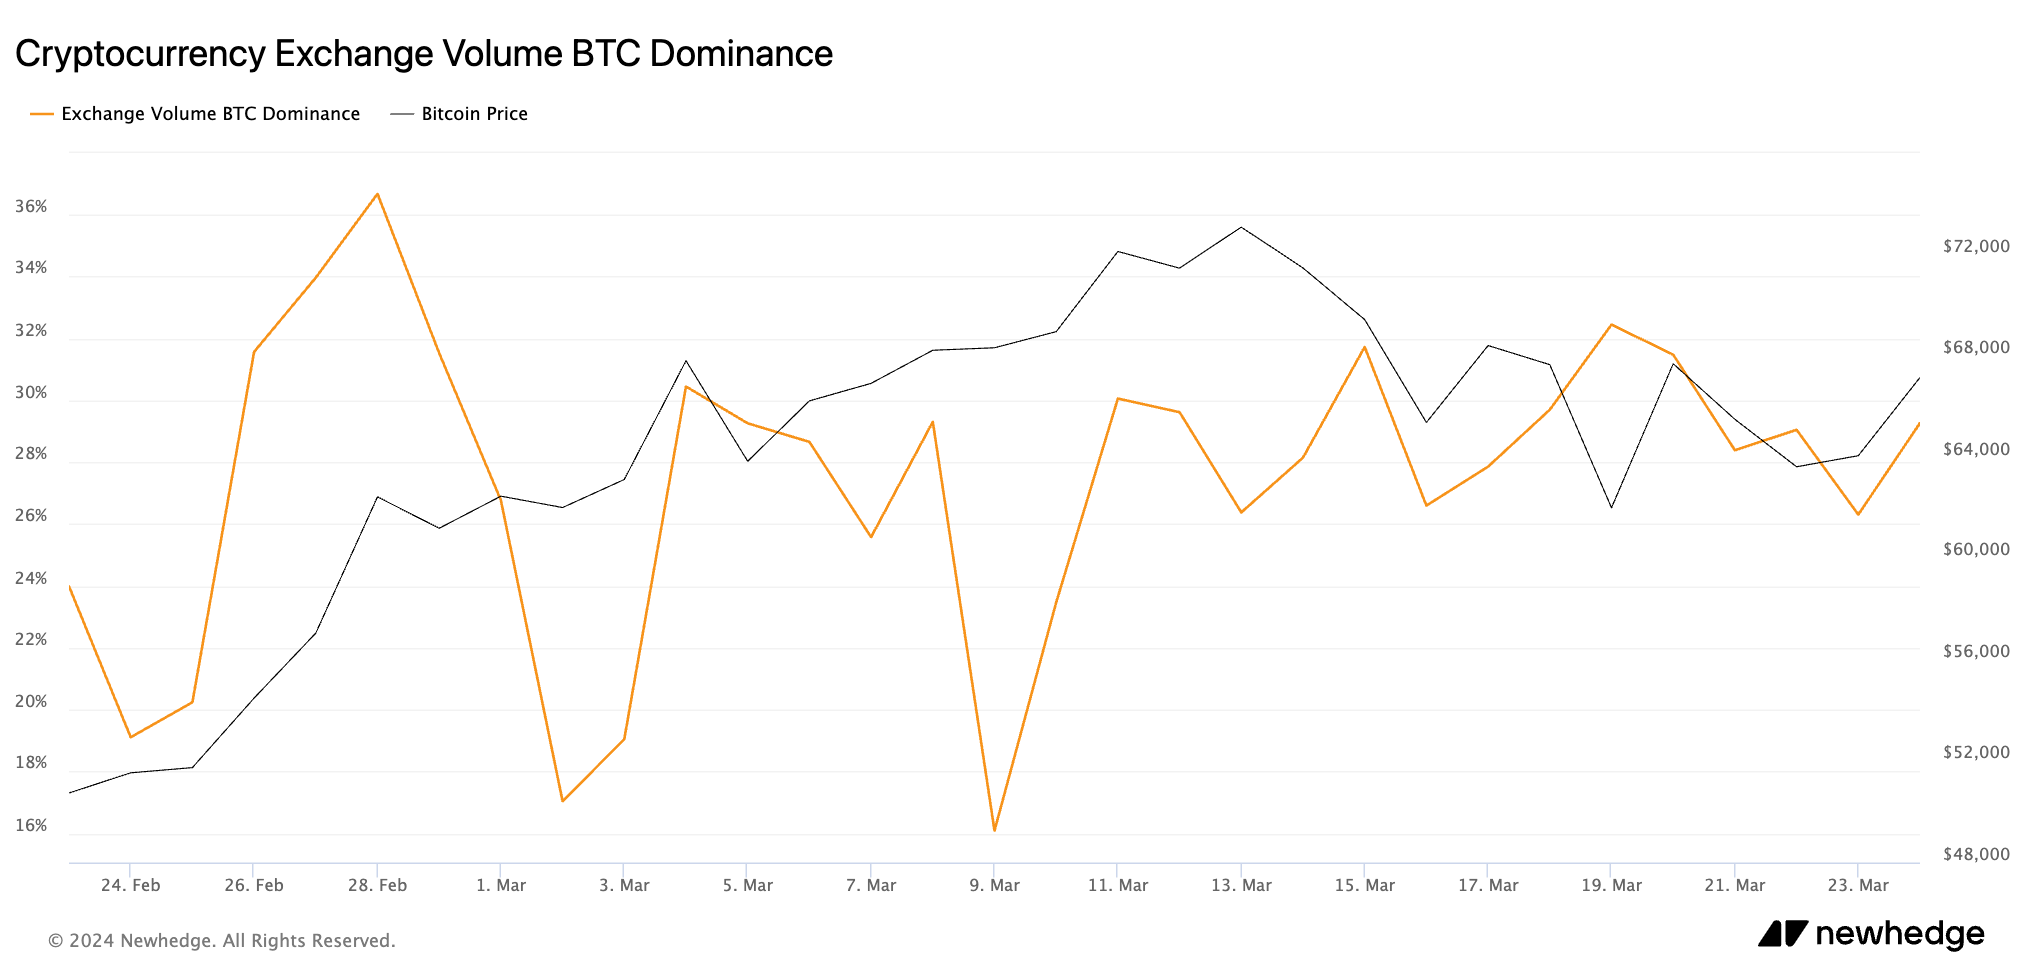 Bitcoin dominance over total CEX volume